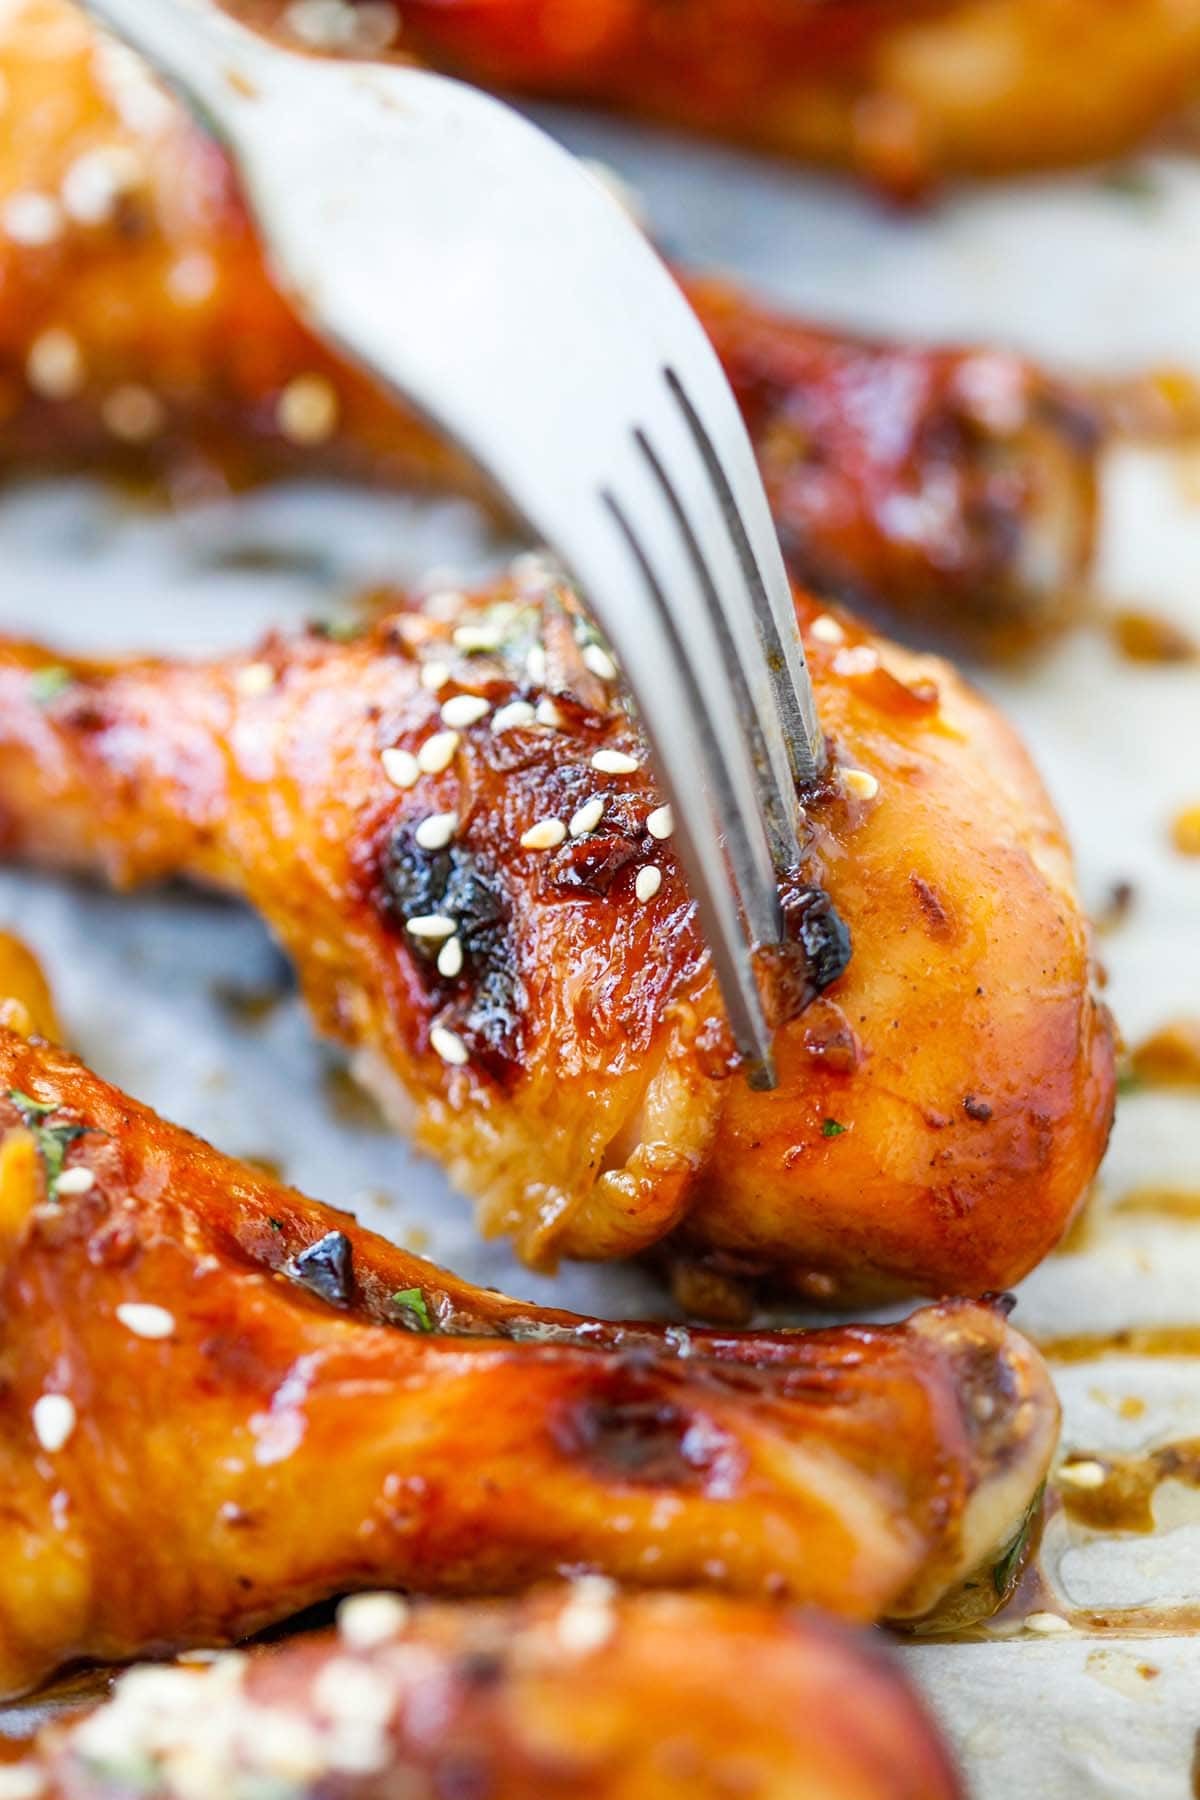 Baked Hoisin Chicken – moist, juicy and delicious chicken marinated with Hoisin sauce. Easy recipe that anyone can make at home | rasamalaysia.com